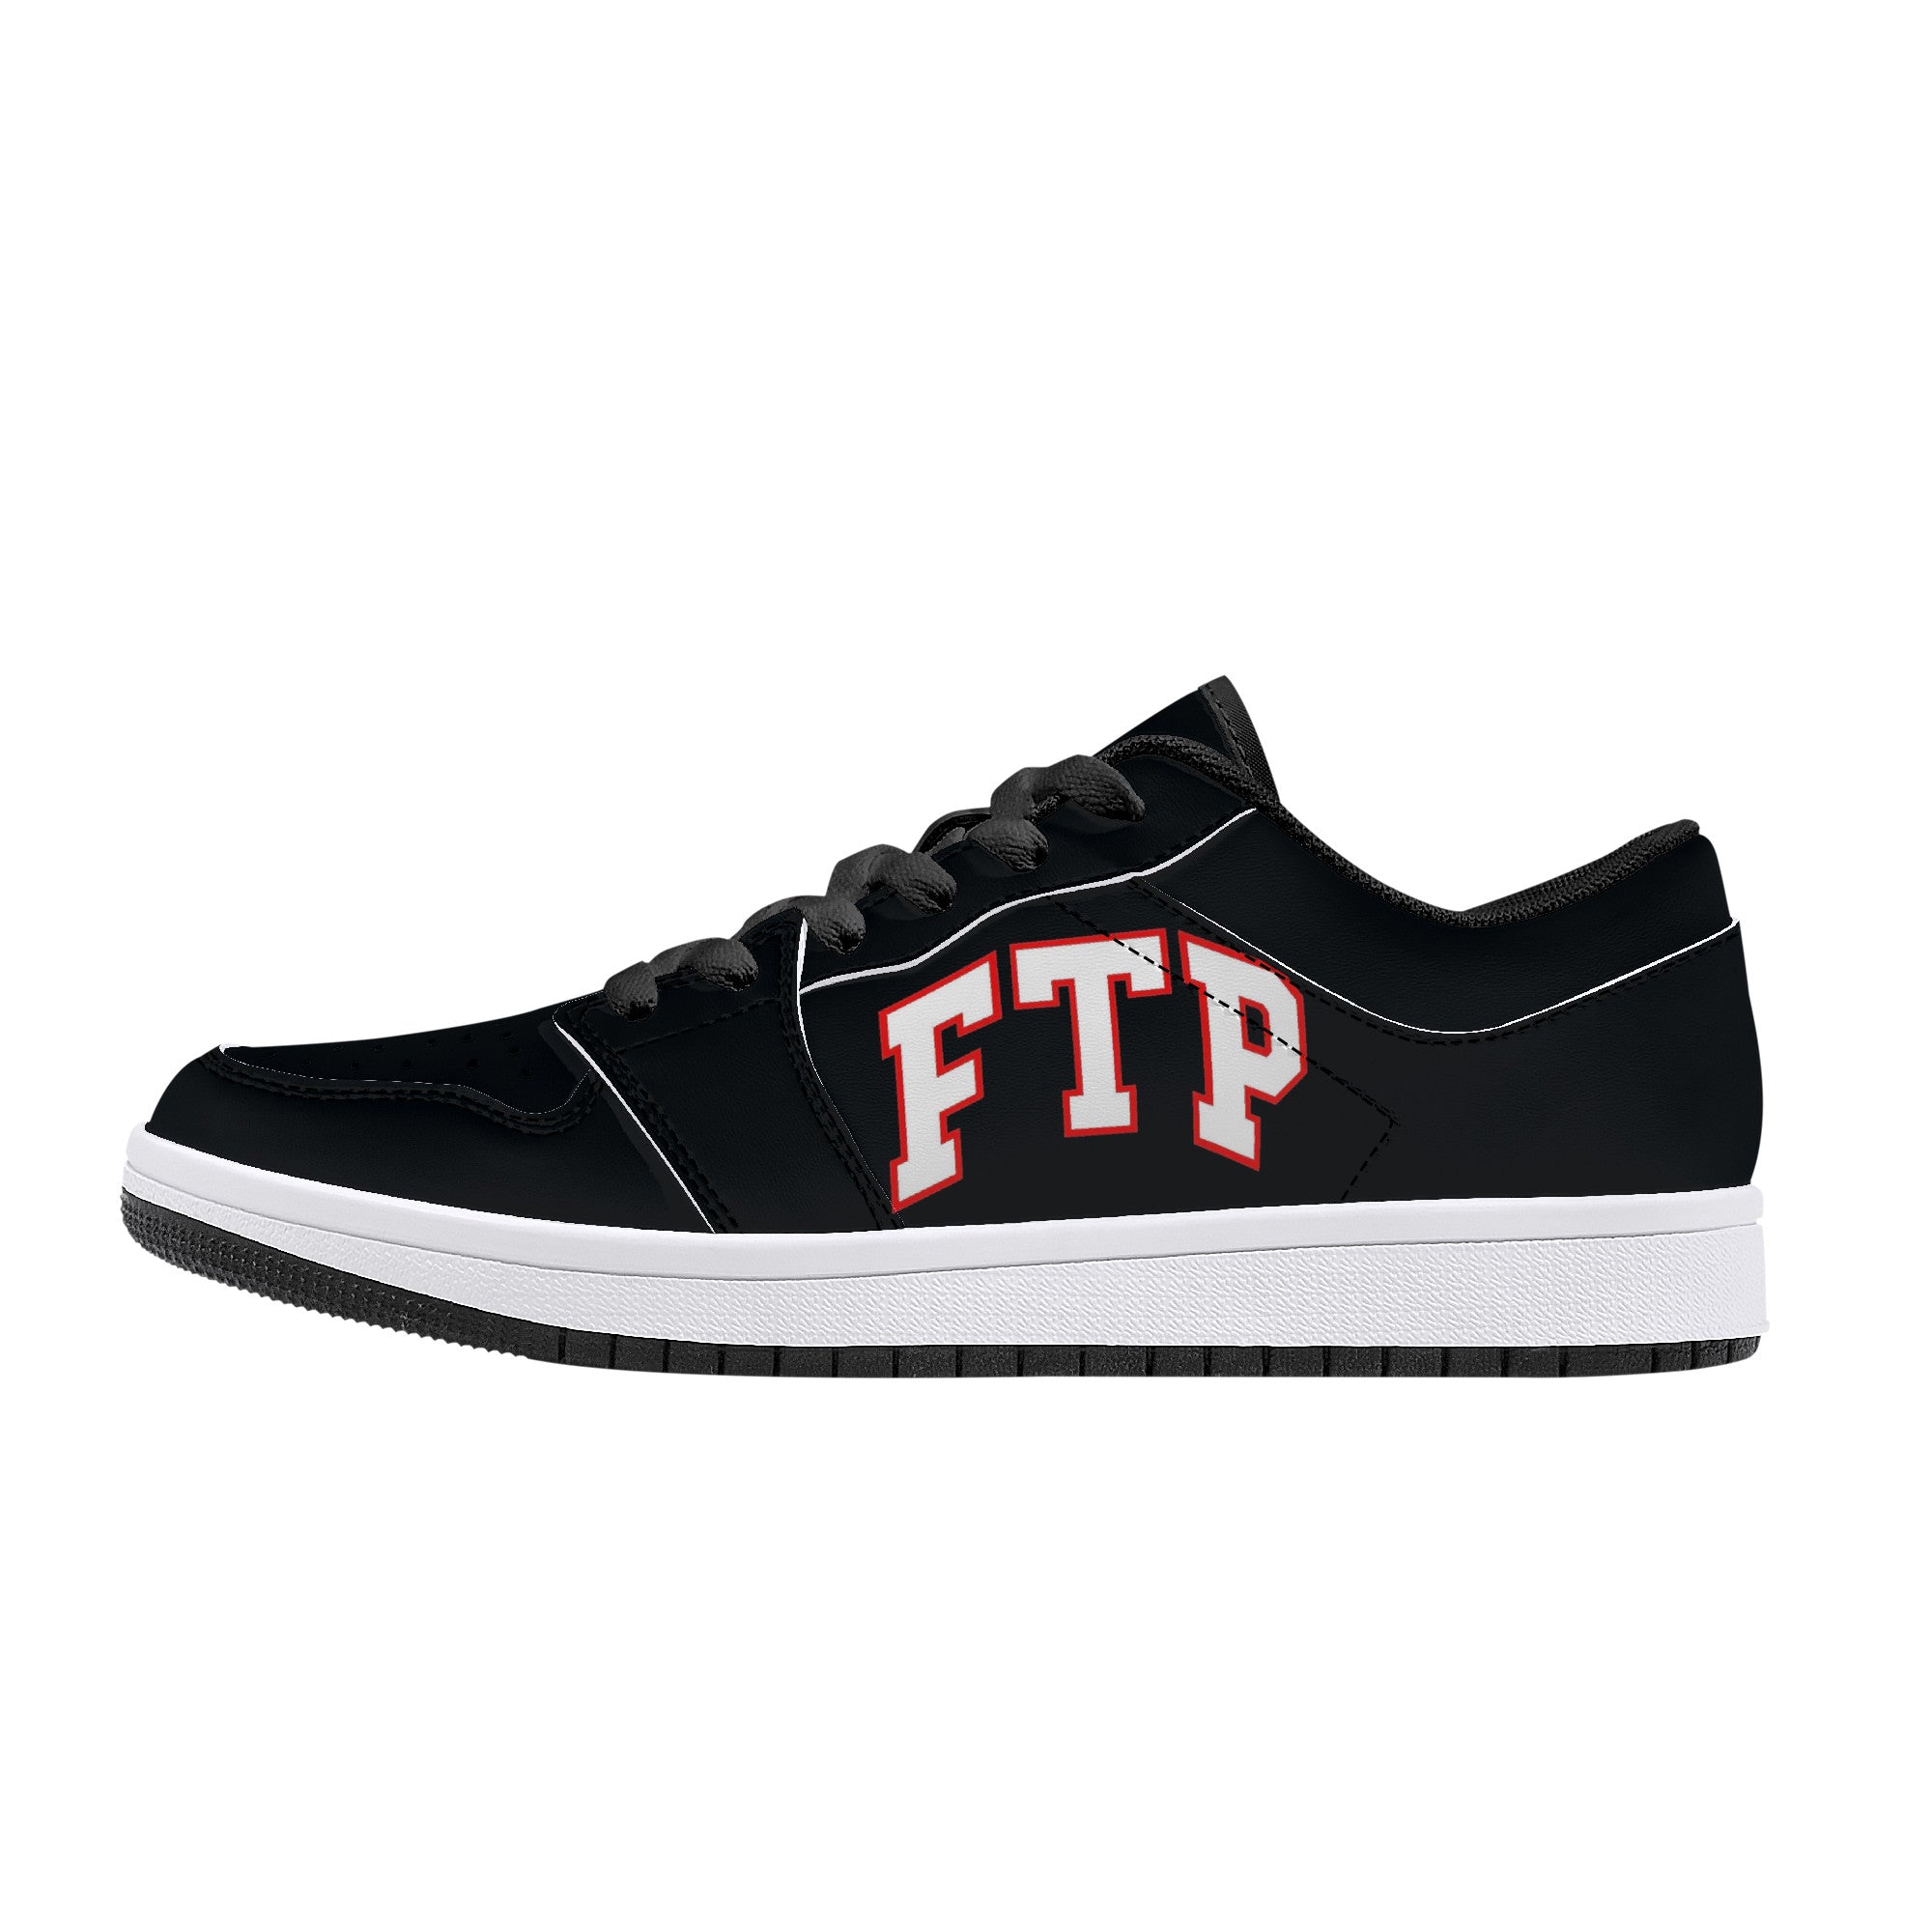 FTP - White on Black - Low-Top Synthetic Leather Sneakers - Black - Shoe Zero